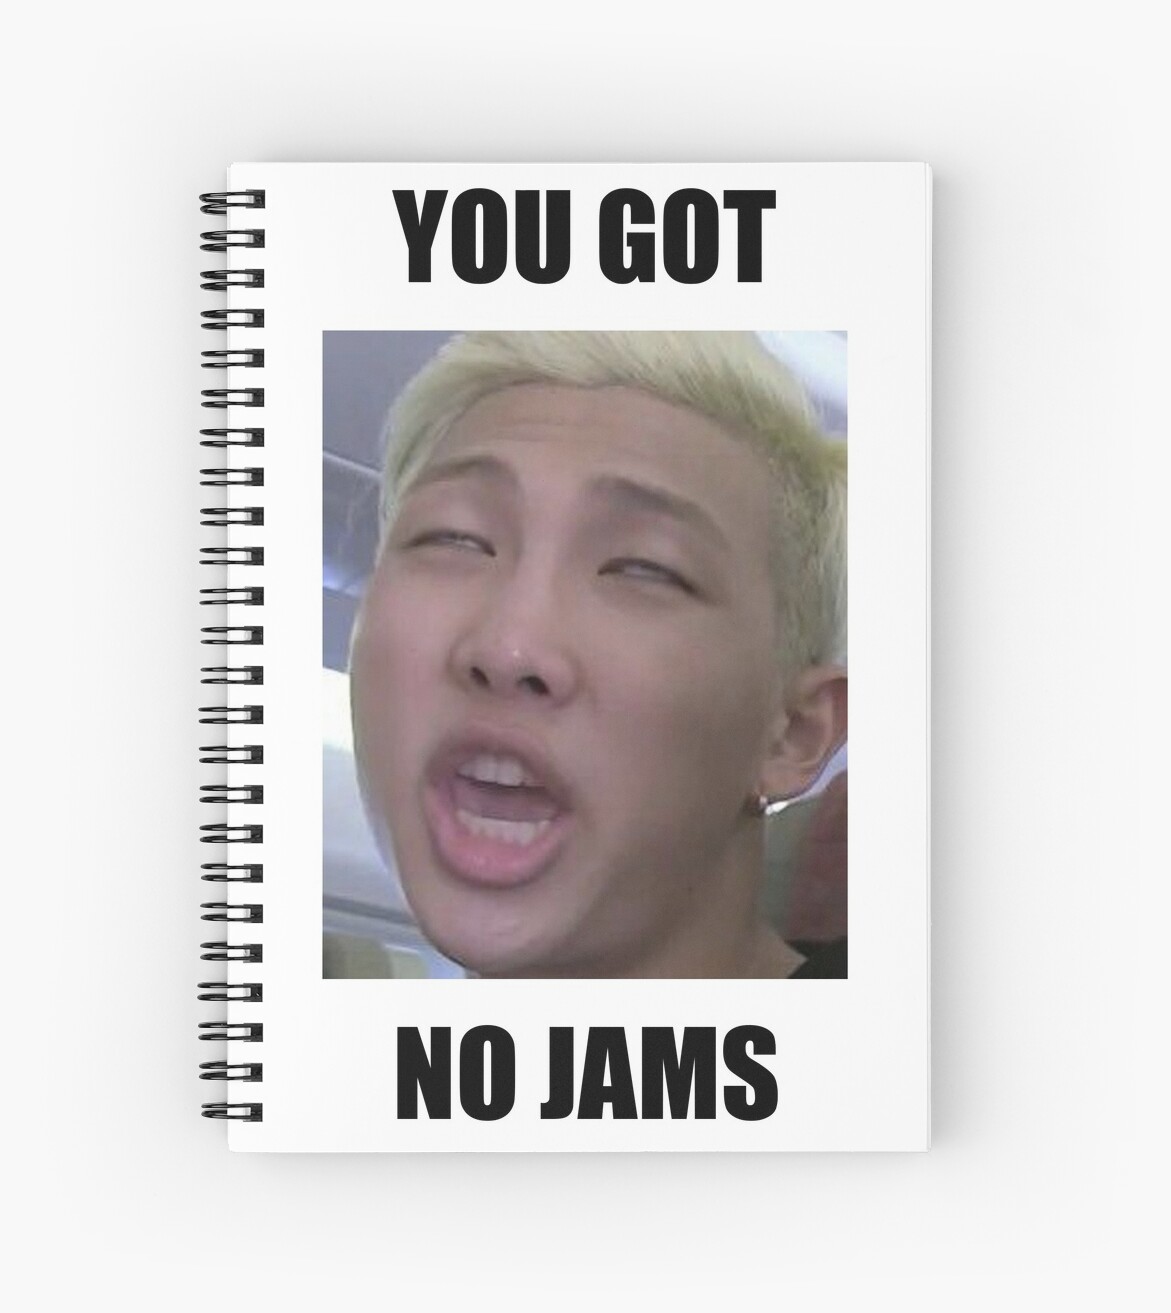 BTS YOU GOT NO JAMS MEME Spiral Notebooks By BethanyPledger Redbubble